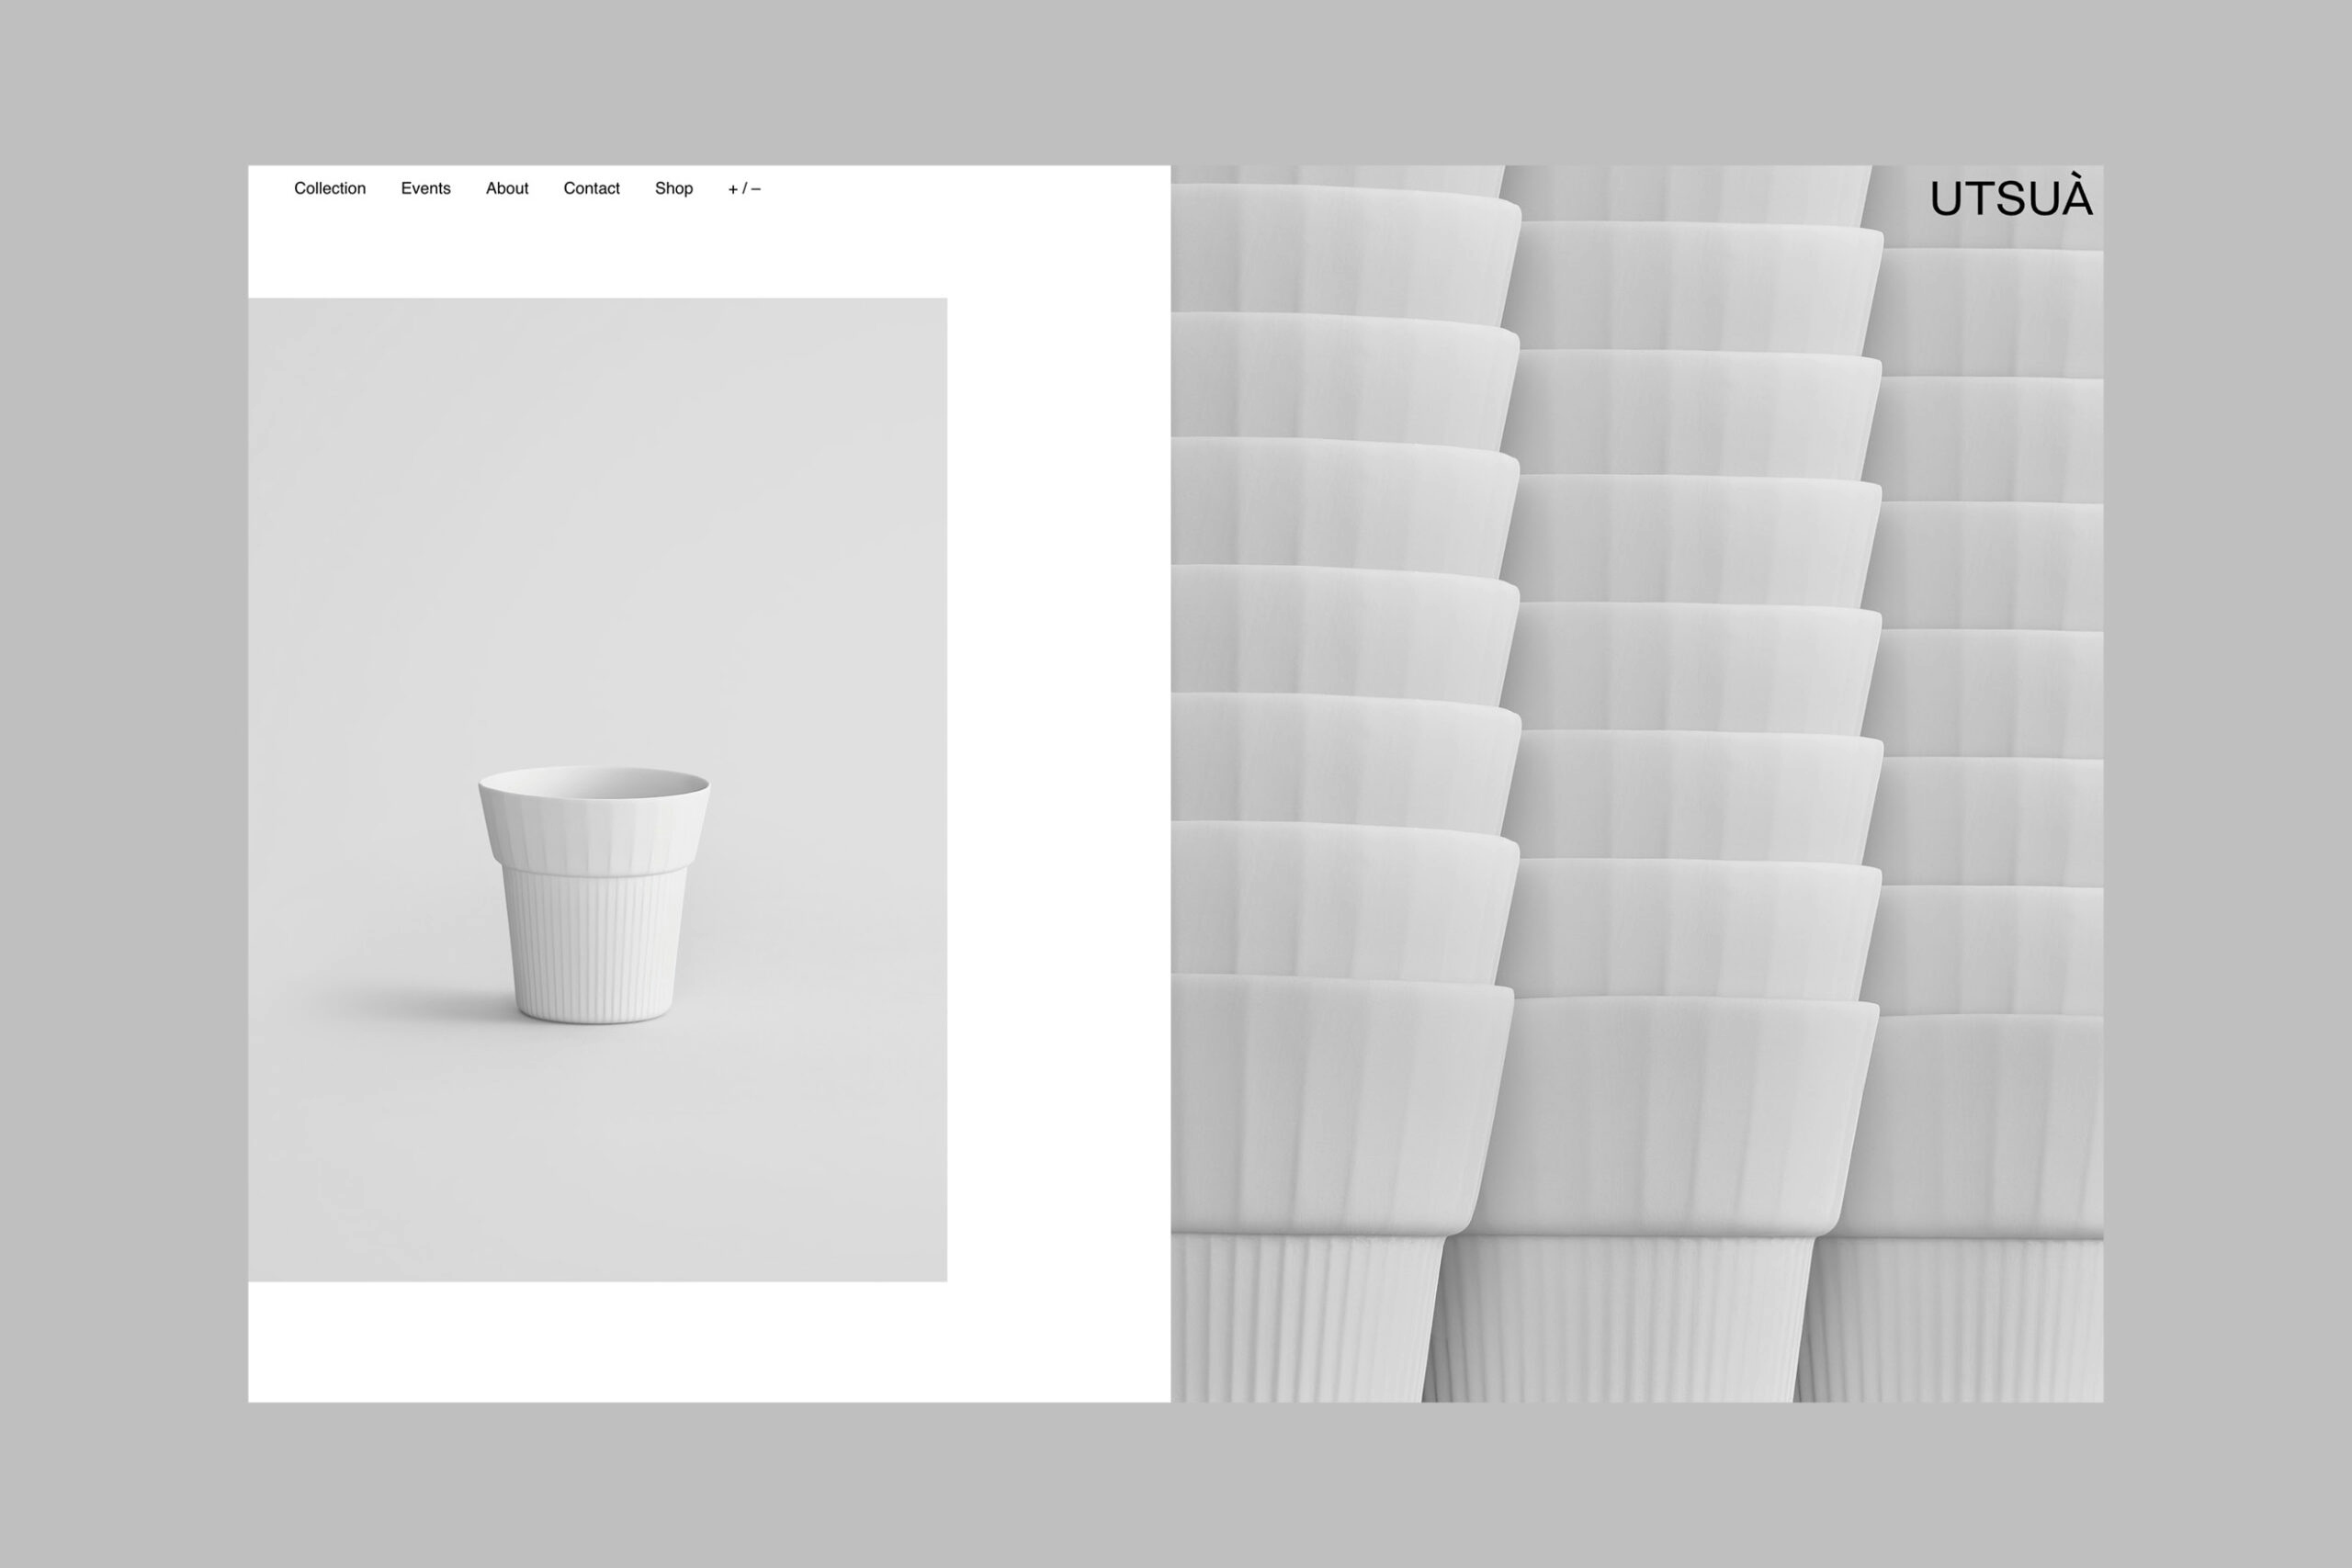 Utsua web layout showing a single cup and stacked cups